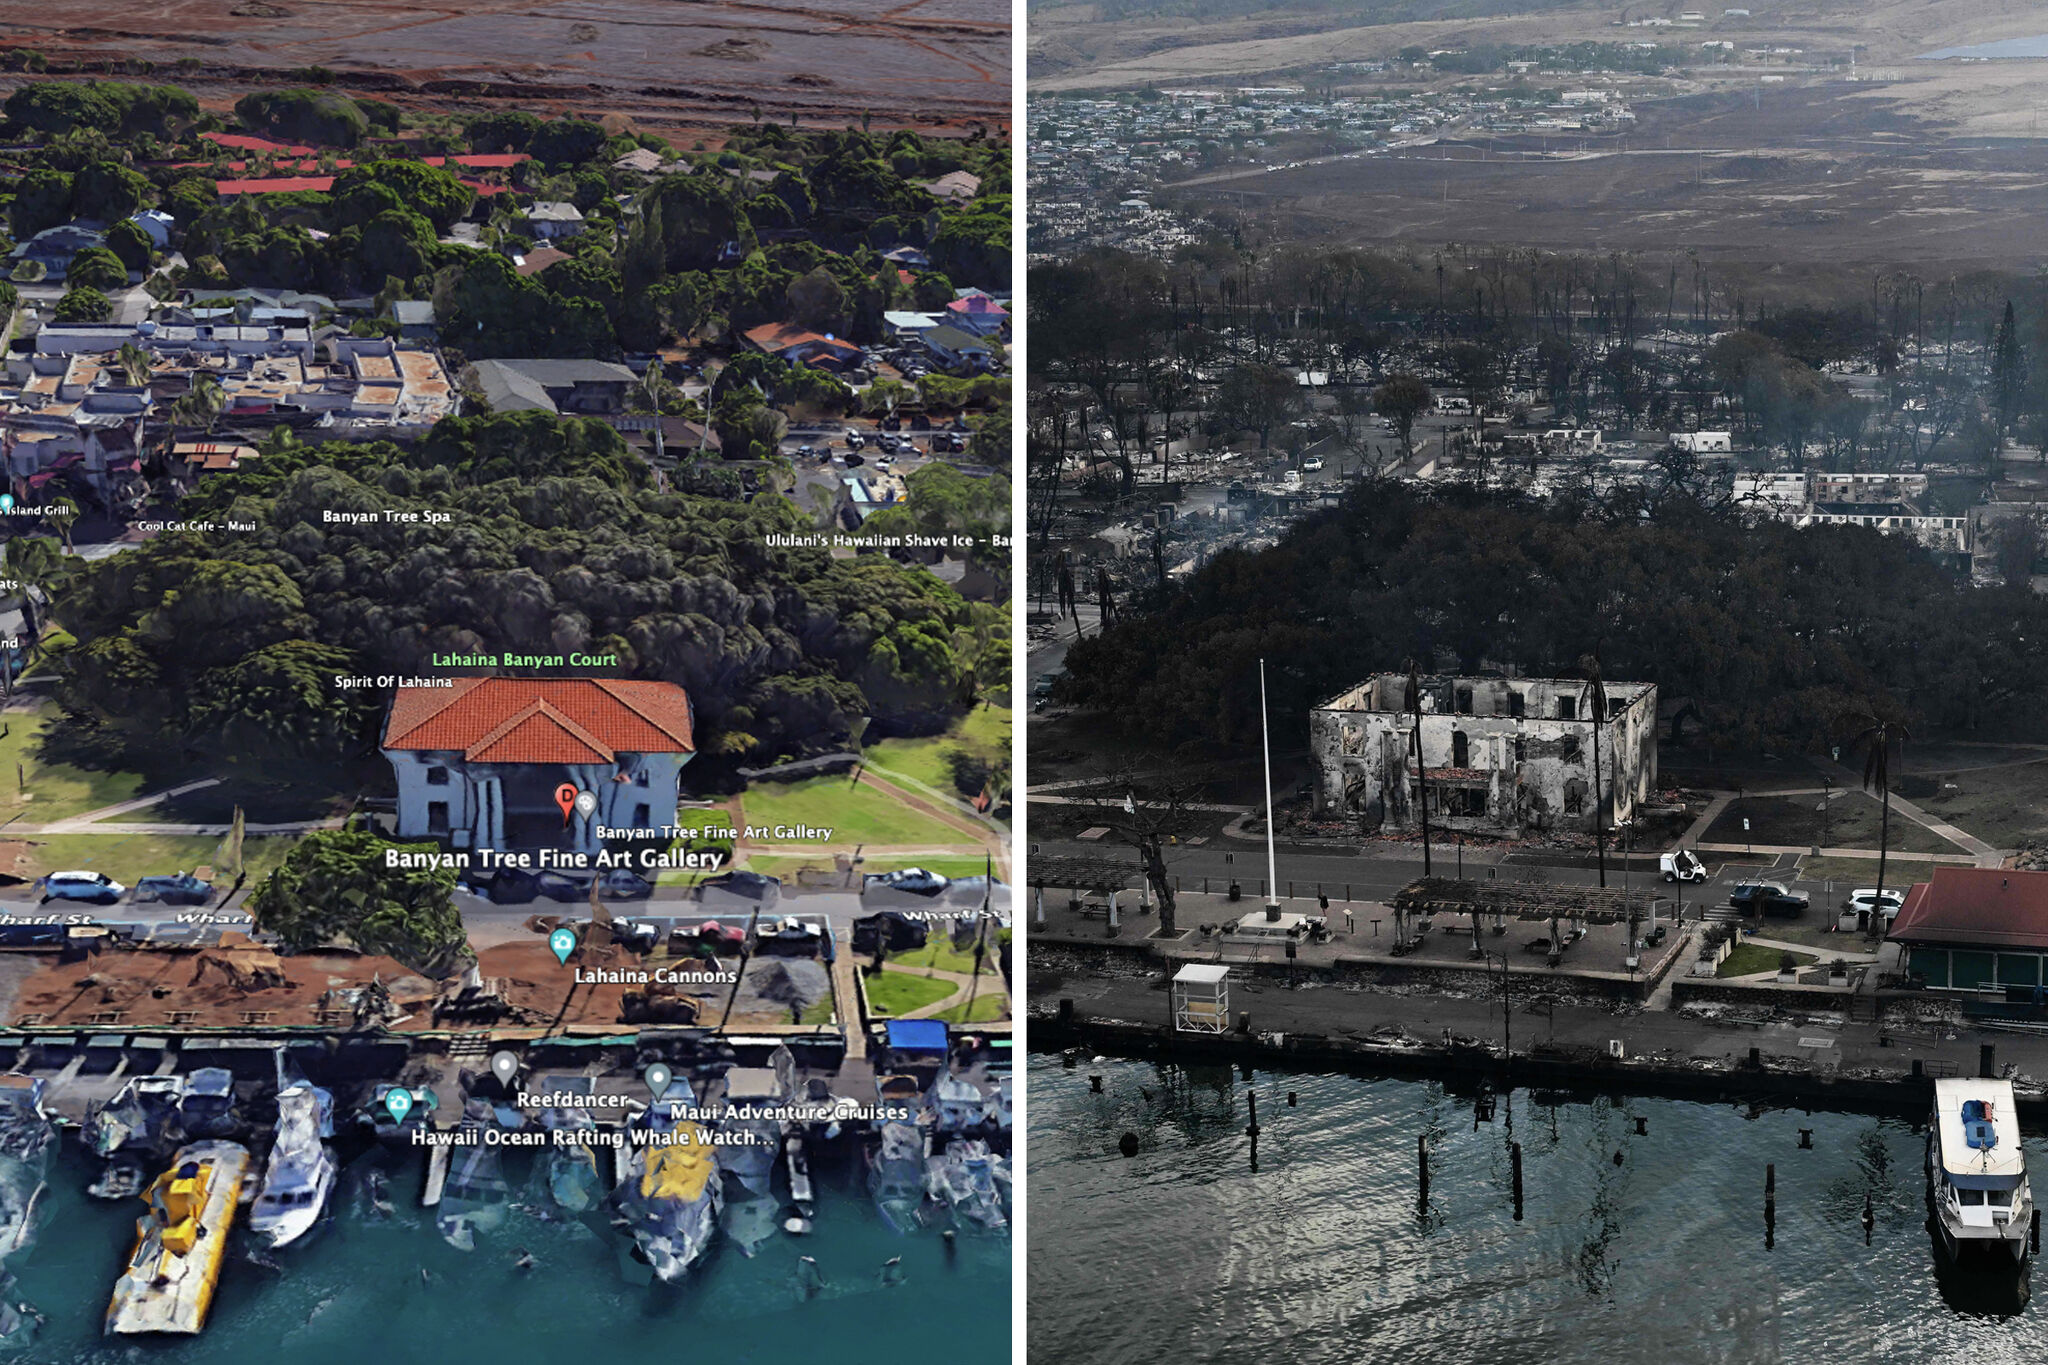 Maui before and after fires: Photos, video show extent of devastation